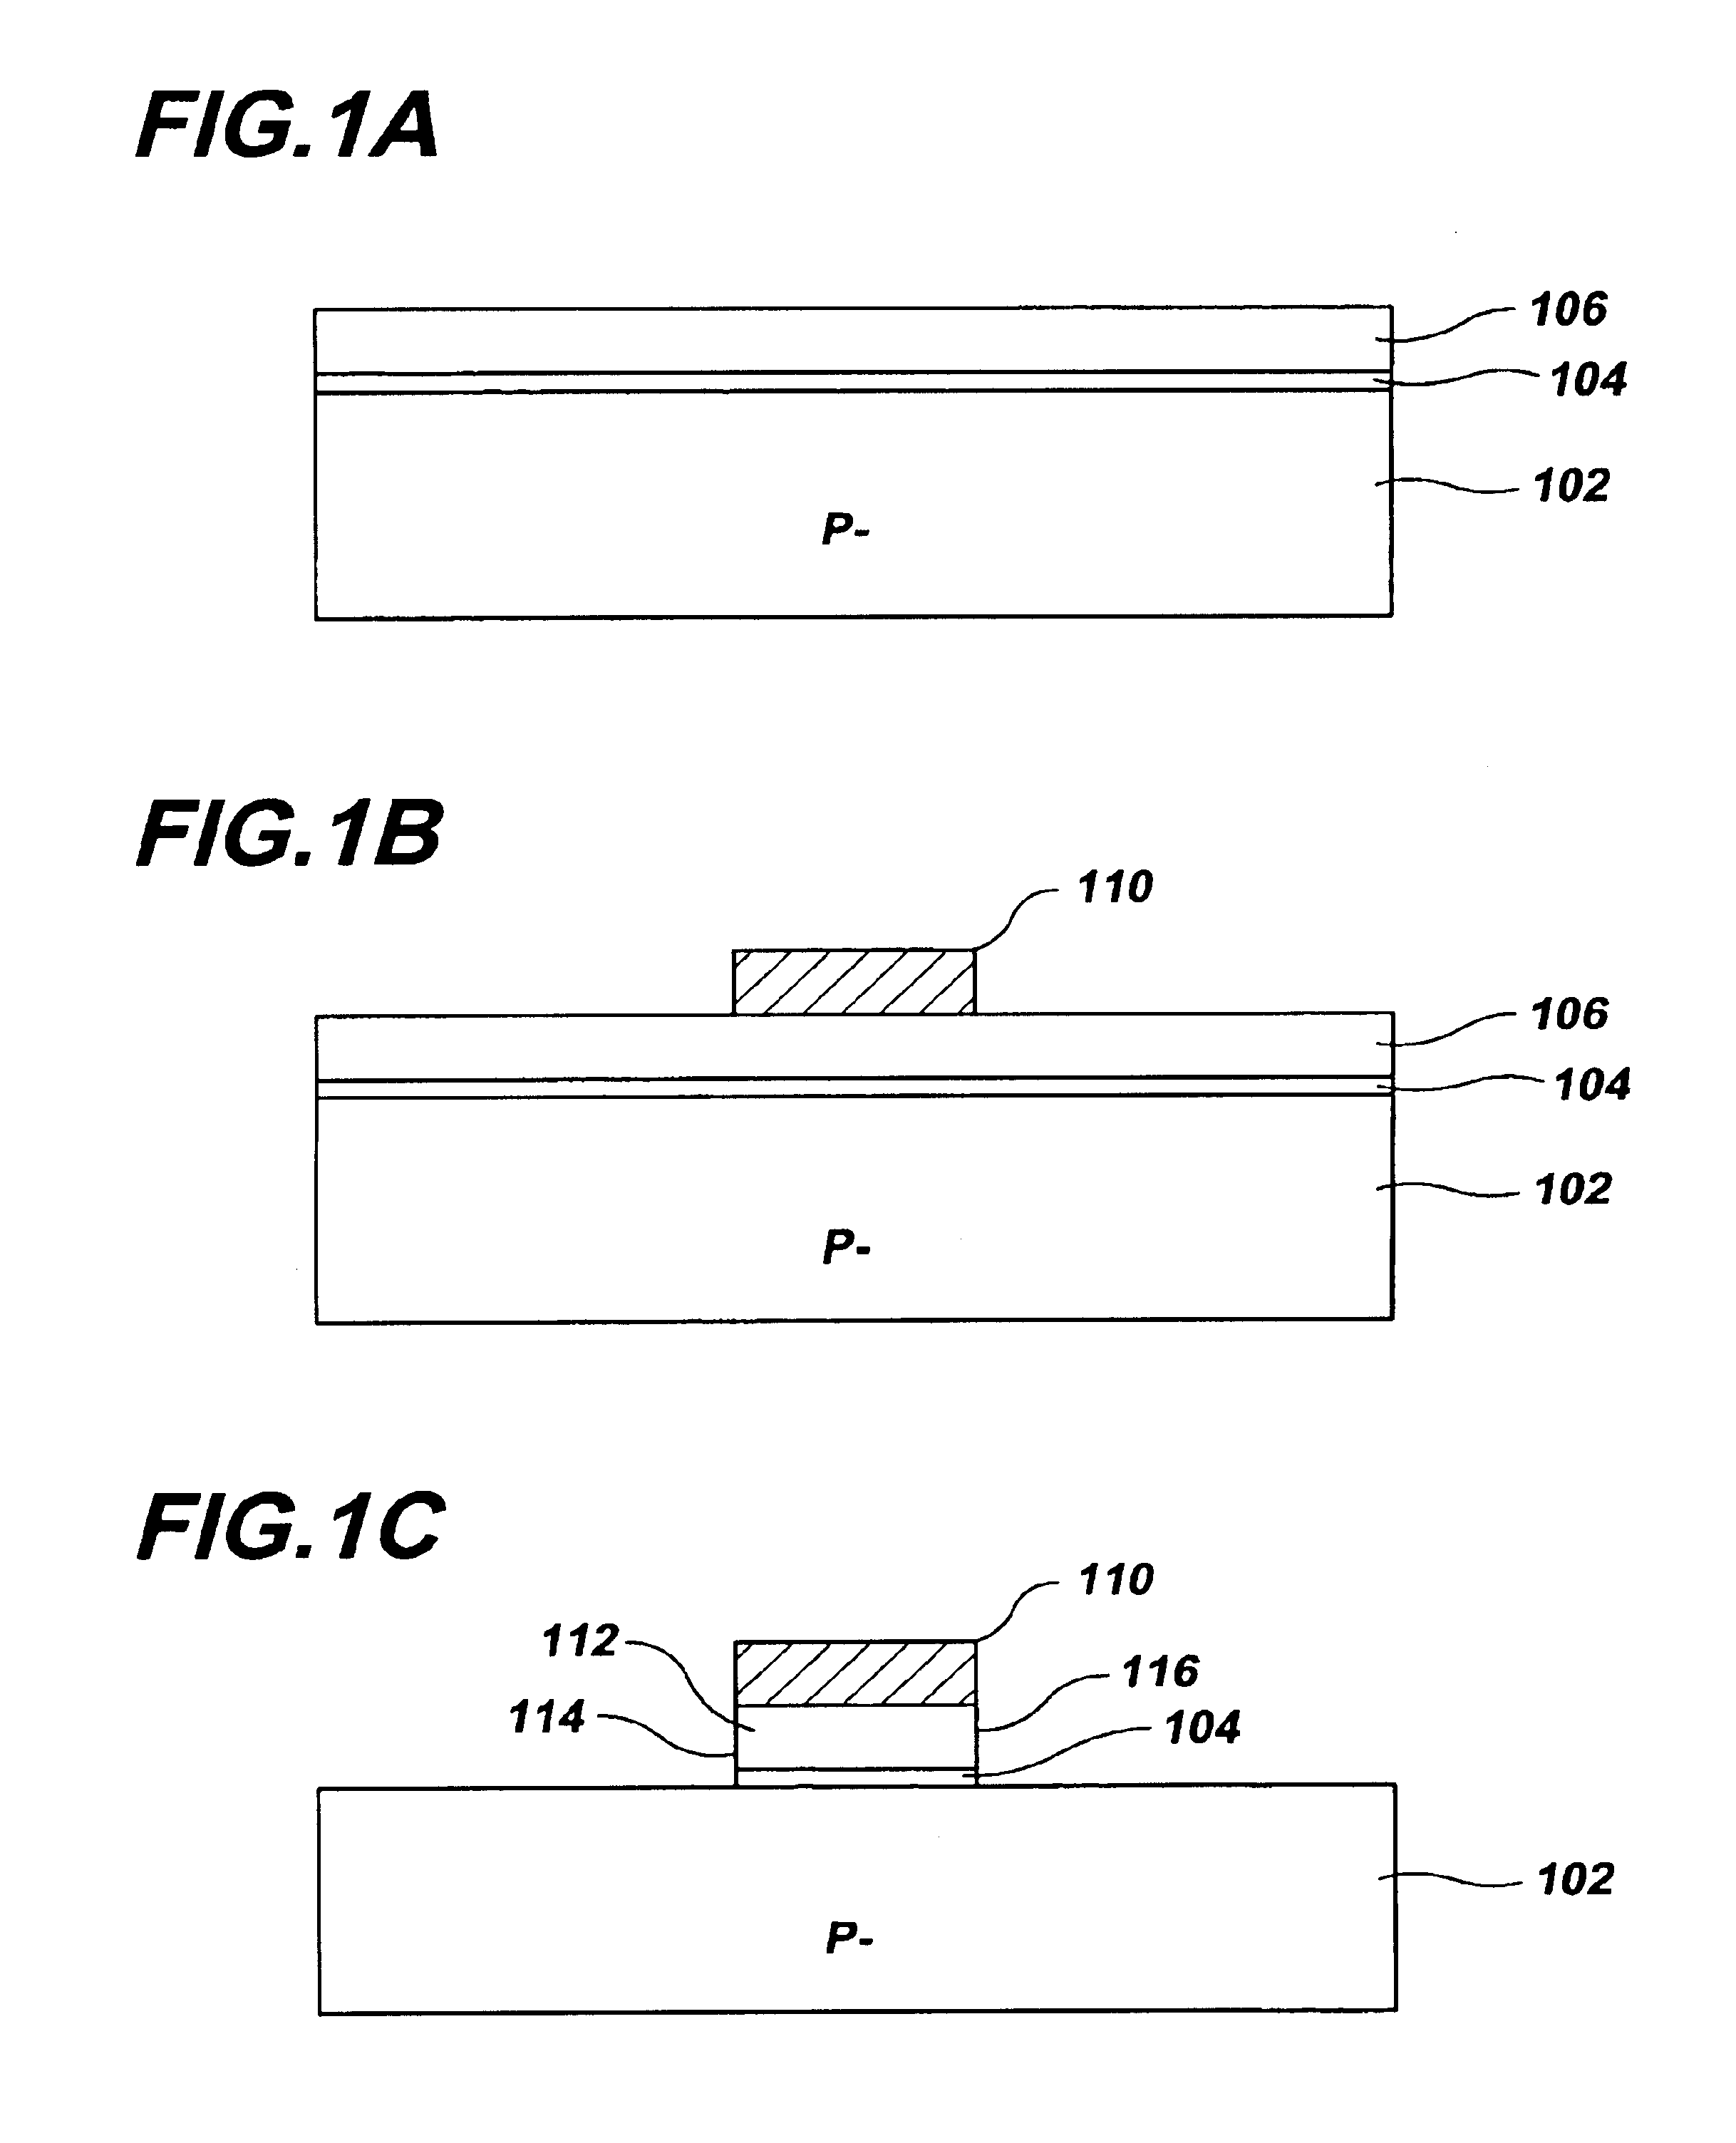 Method of making ultra thin oxide formation using selective etchback technique integrated with thin nitride layer for high performance MOSFET